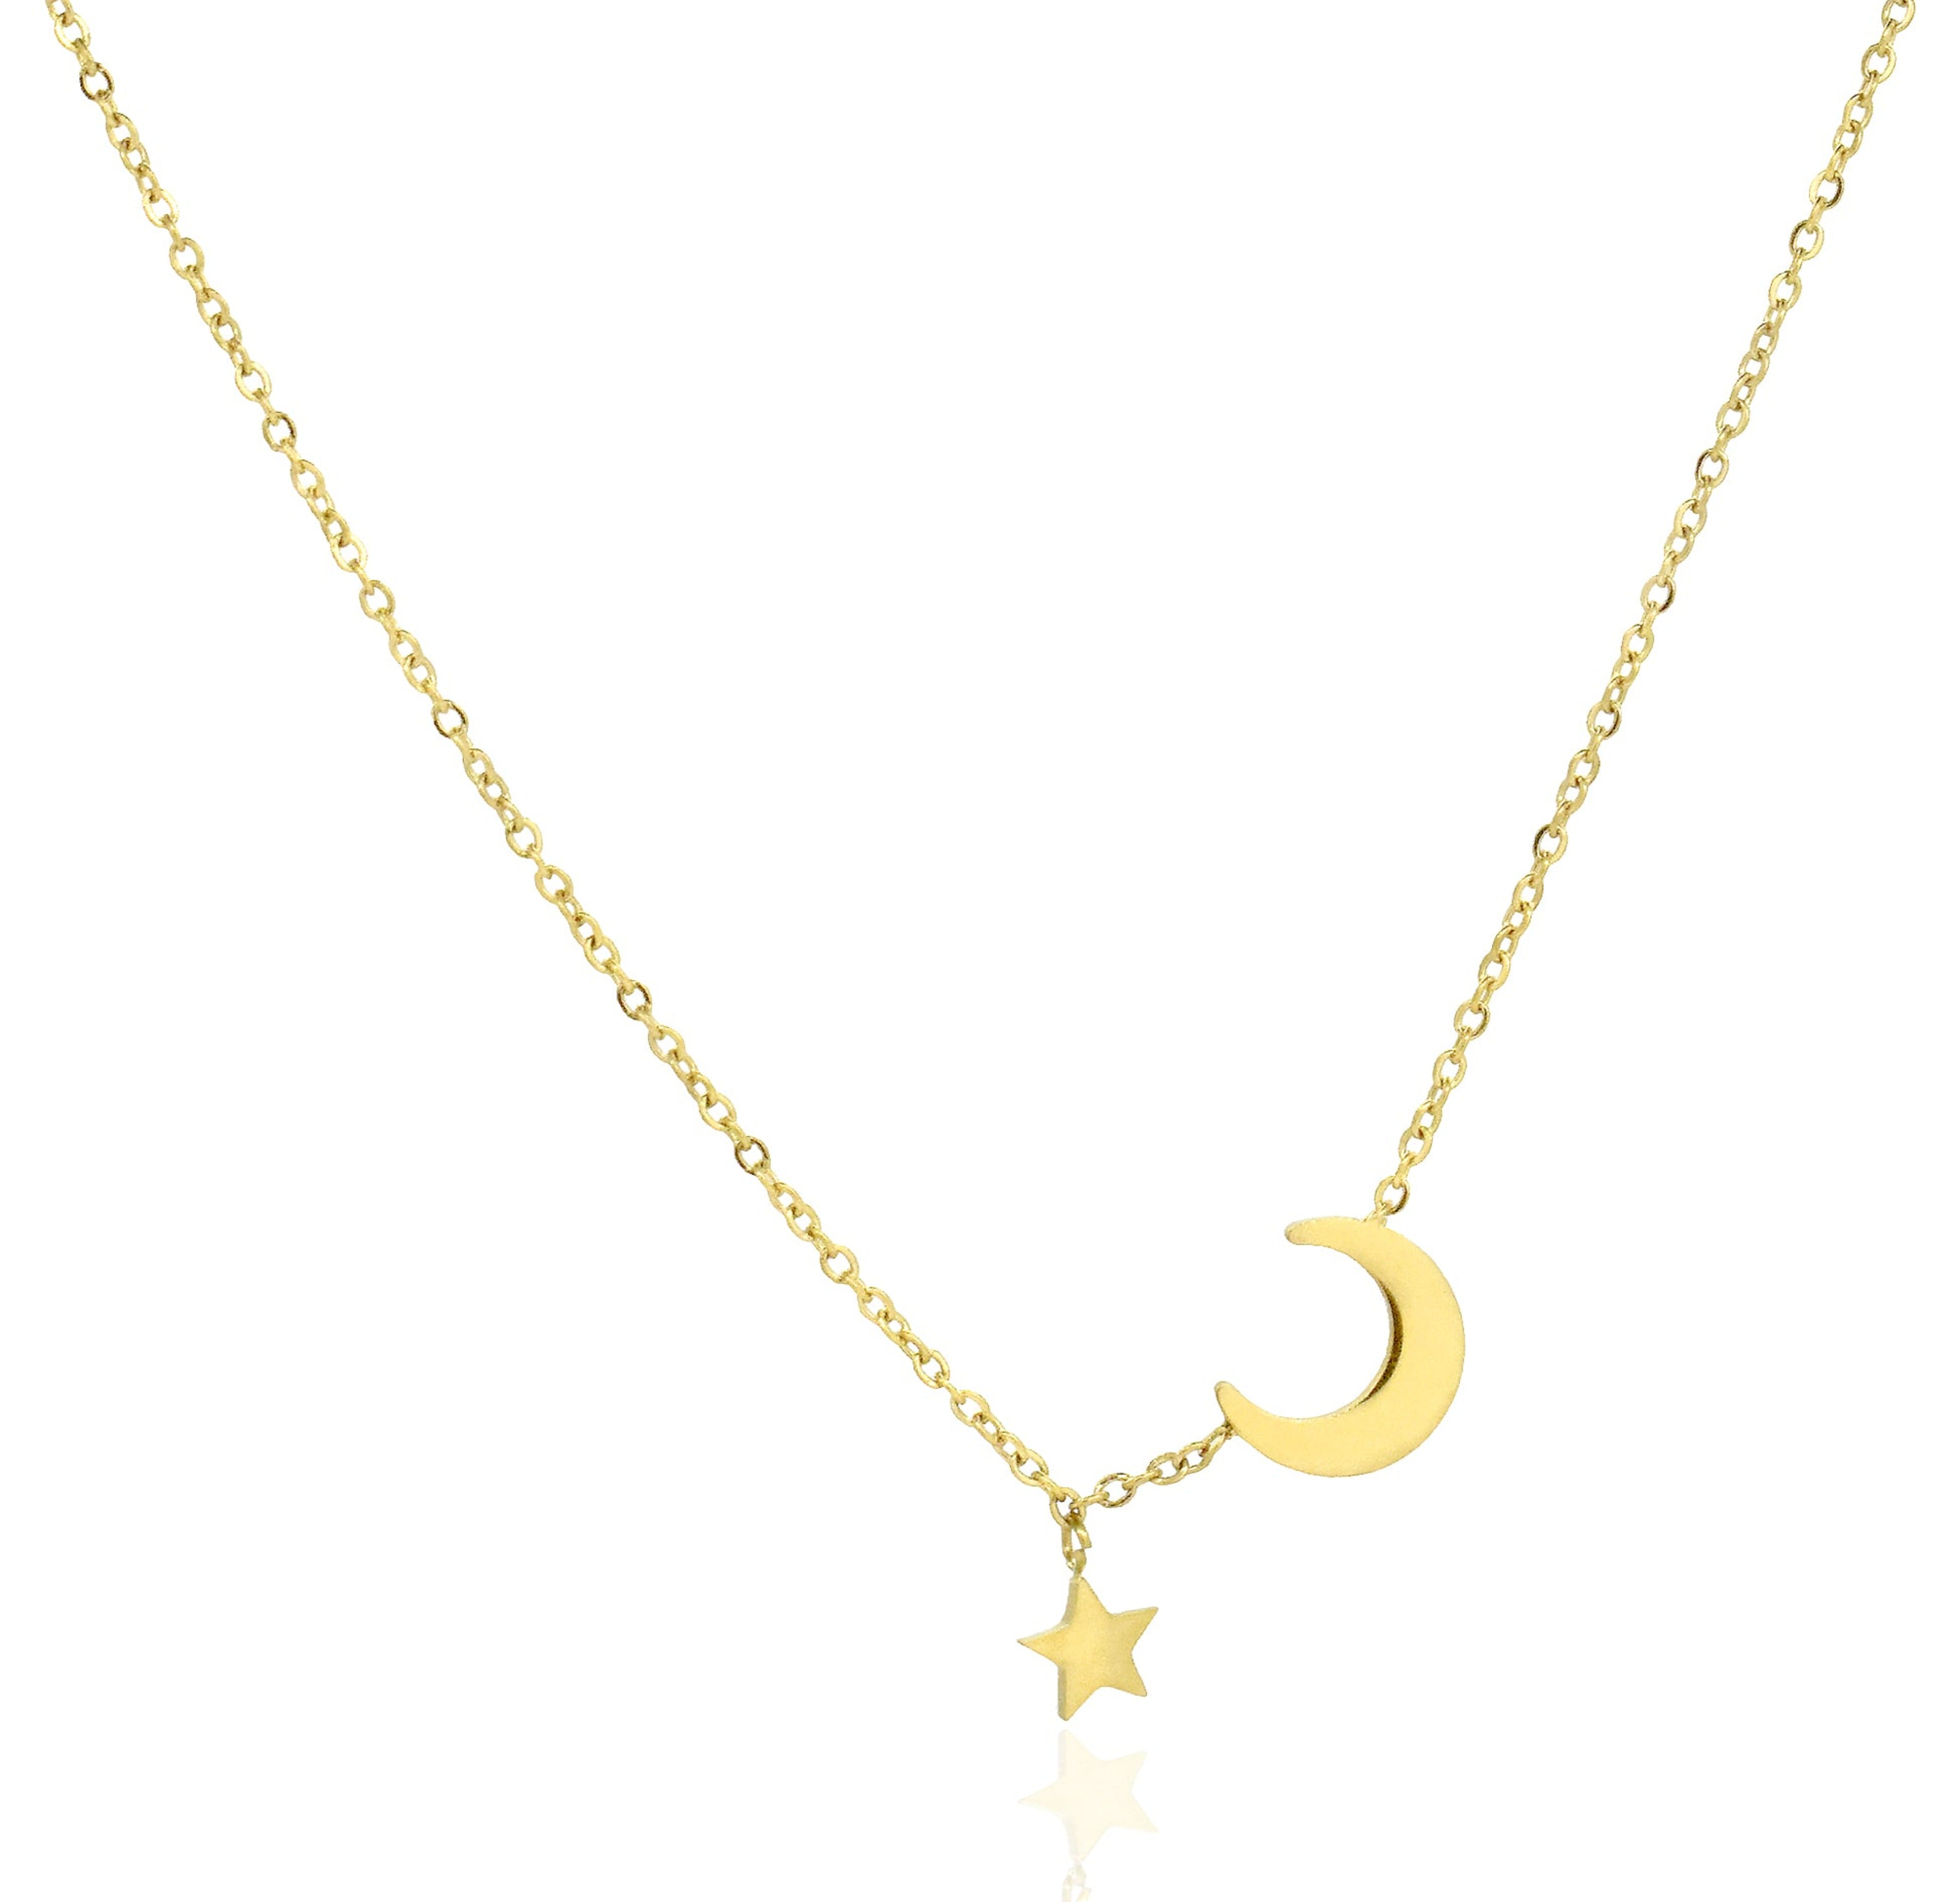 gold star moon necklace waterproof jewelry